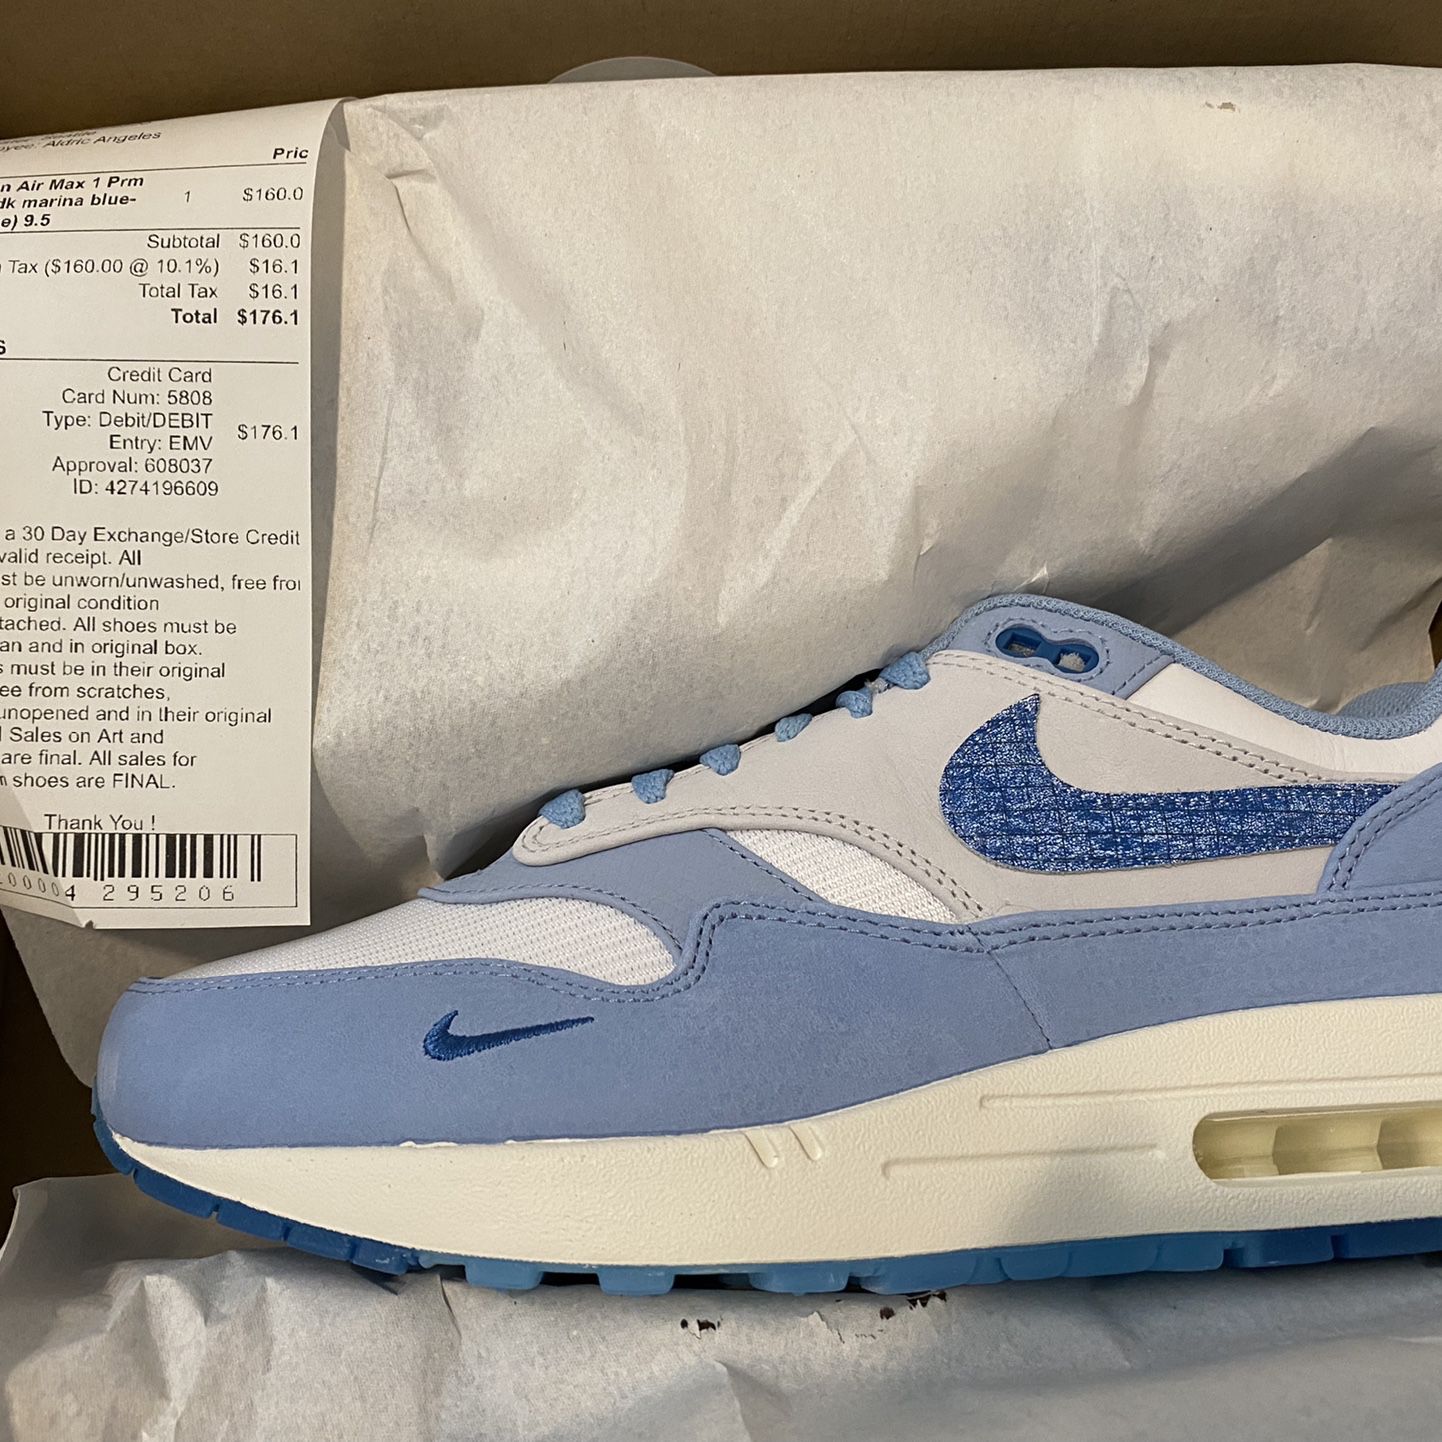 Vergevingsgezind accent onstabiel Size 8 Nike Air Max 1 PRM Blueprint Brand New In Hand With Receipt for Sale  in Federal Way, WA - OfferUp